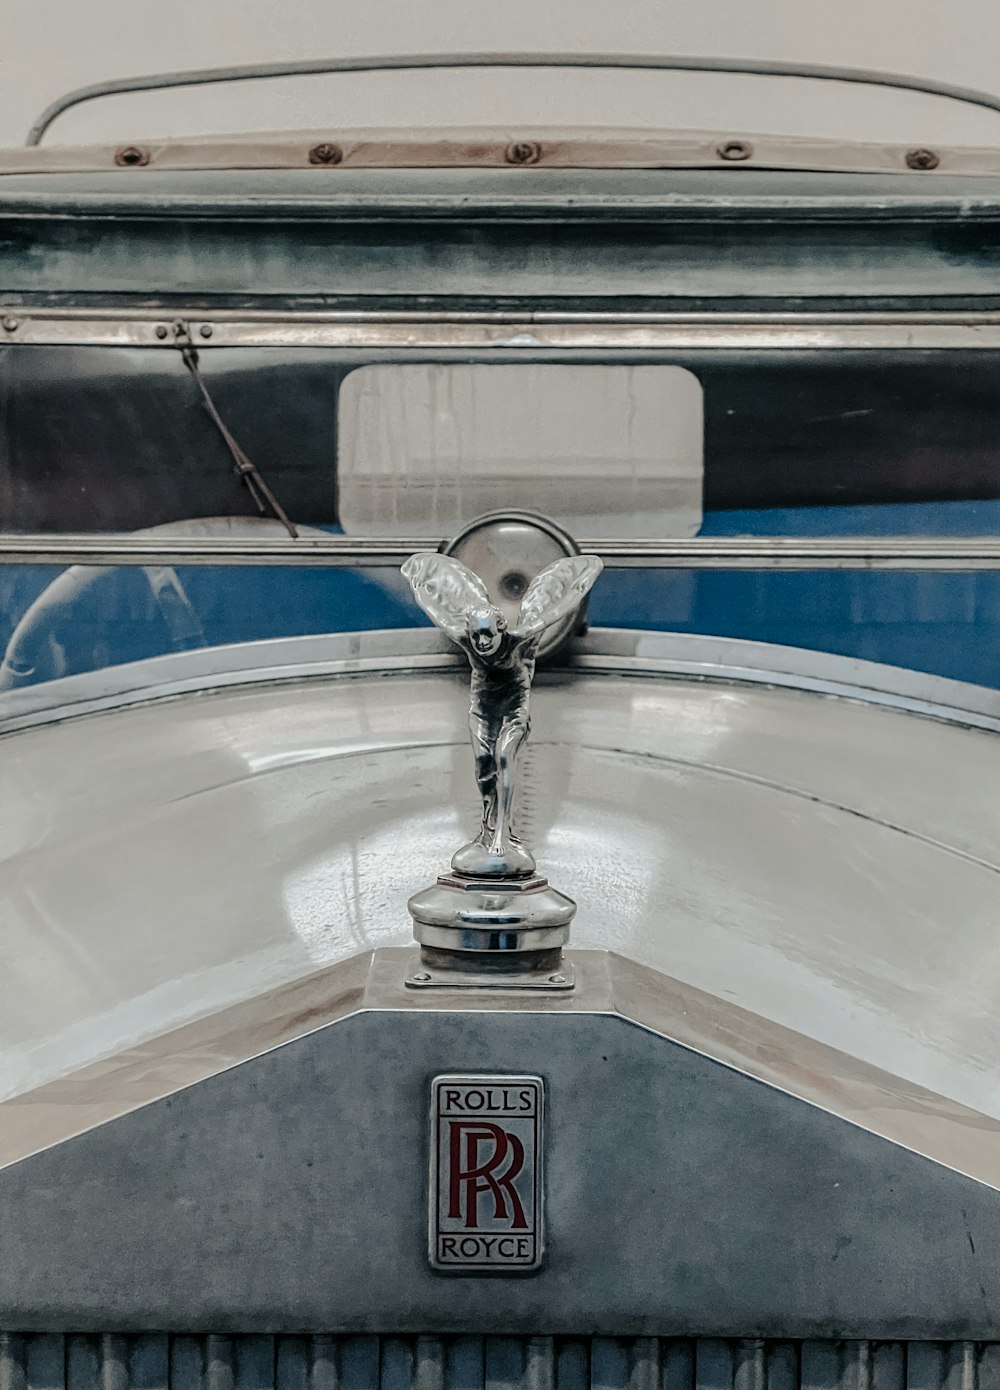 the emblem on the front of an old car